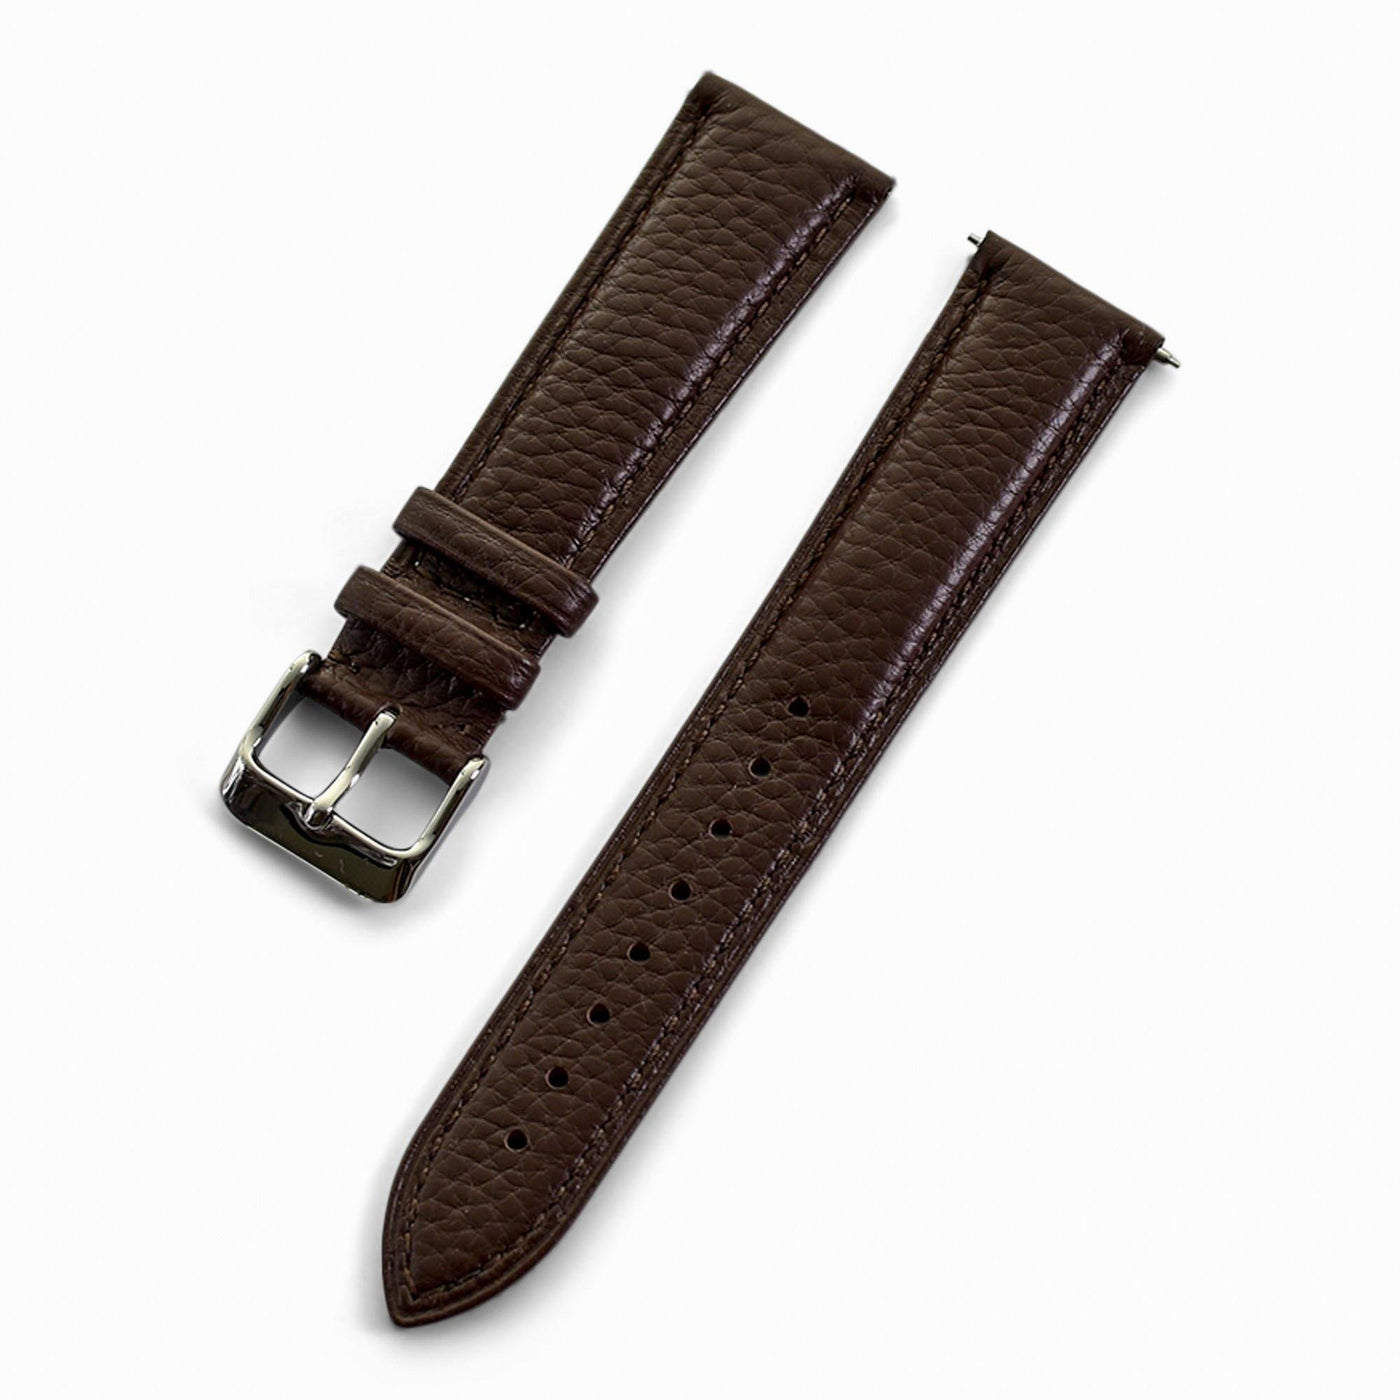 THE PEBBLE QUICK RELEASE DARK BROWN - The Sydney Strap Co.